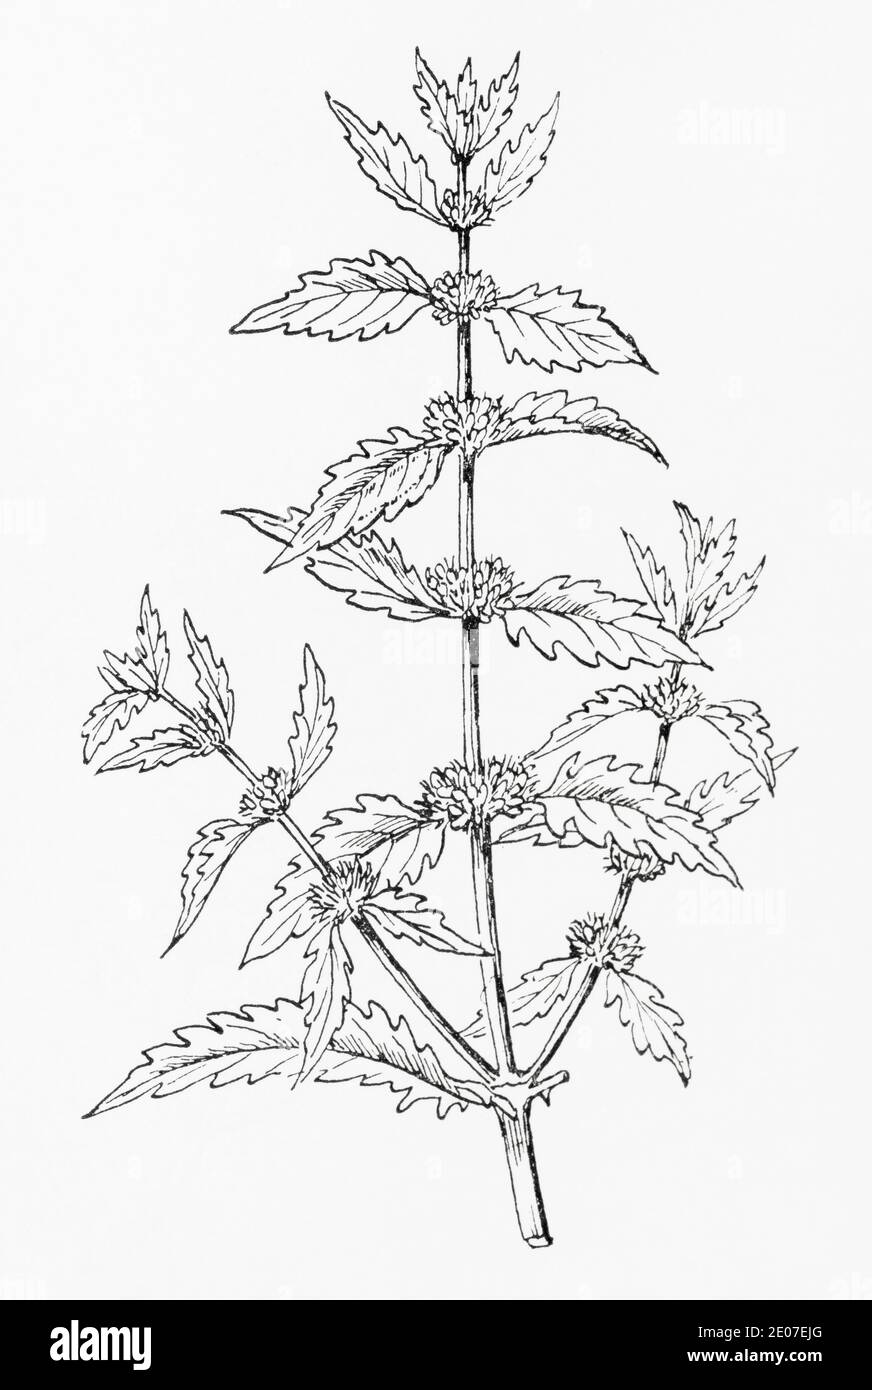 Old botanical illustration engraving of Gypsywort / Lycopus europaeus. Traditional medicinal herbal plant. See Notes Stock Photo